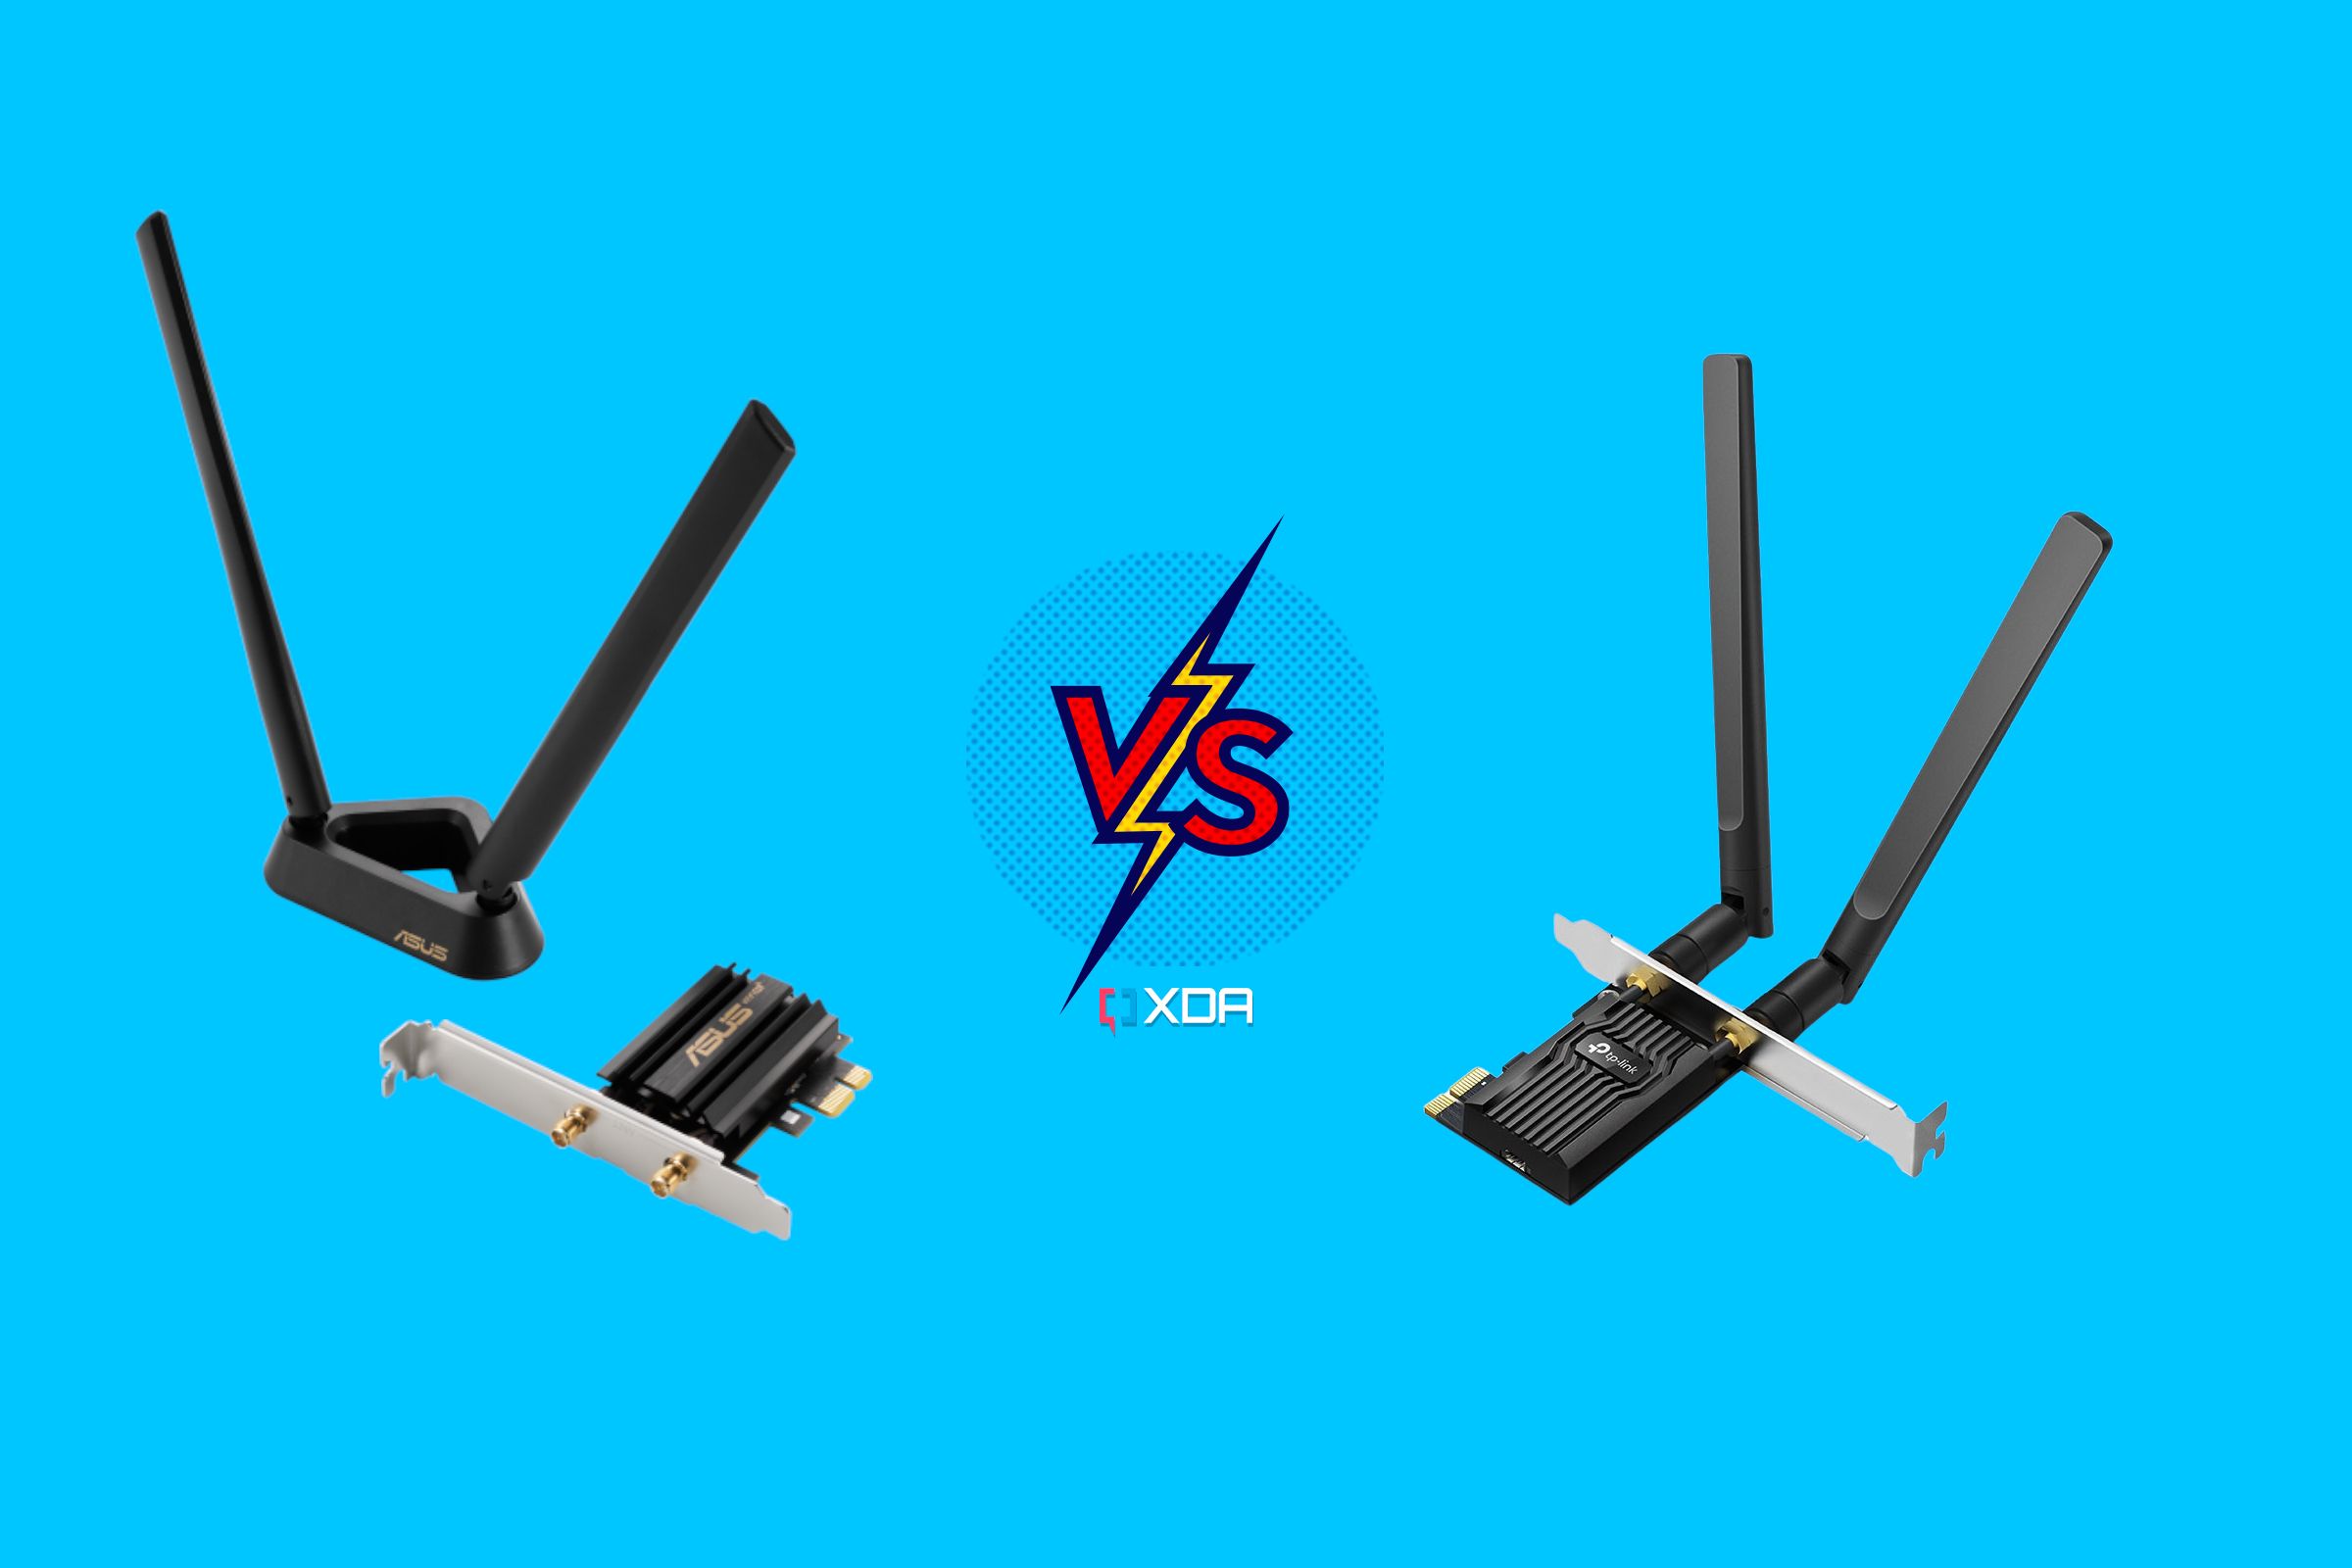 Asus PCE-AXE59BT Wi-fi 6E PCIe adapter vs. TP-Link Archer TX20E Wi-Fi 6 adapter